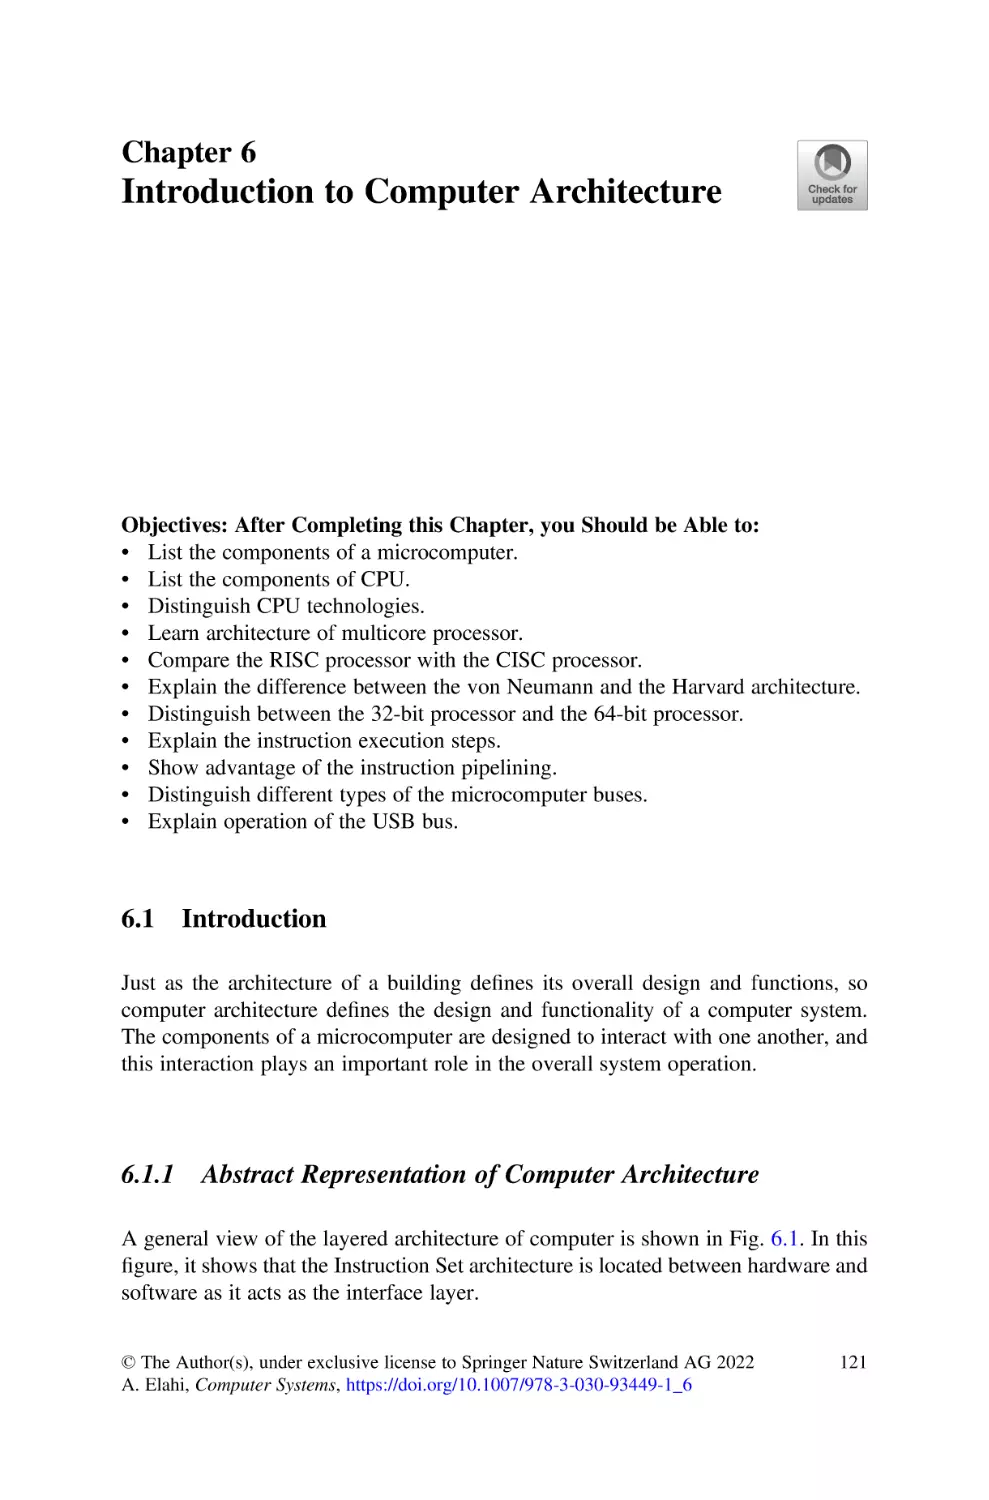 Chapter 6
6.1 Introduction
6.1.1 Abstract Representation of Computer Architecture